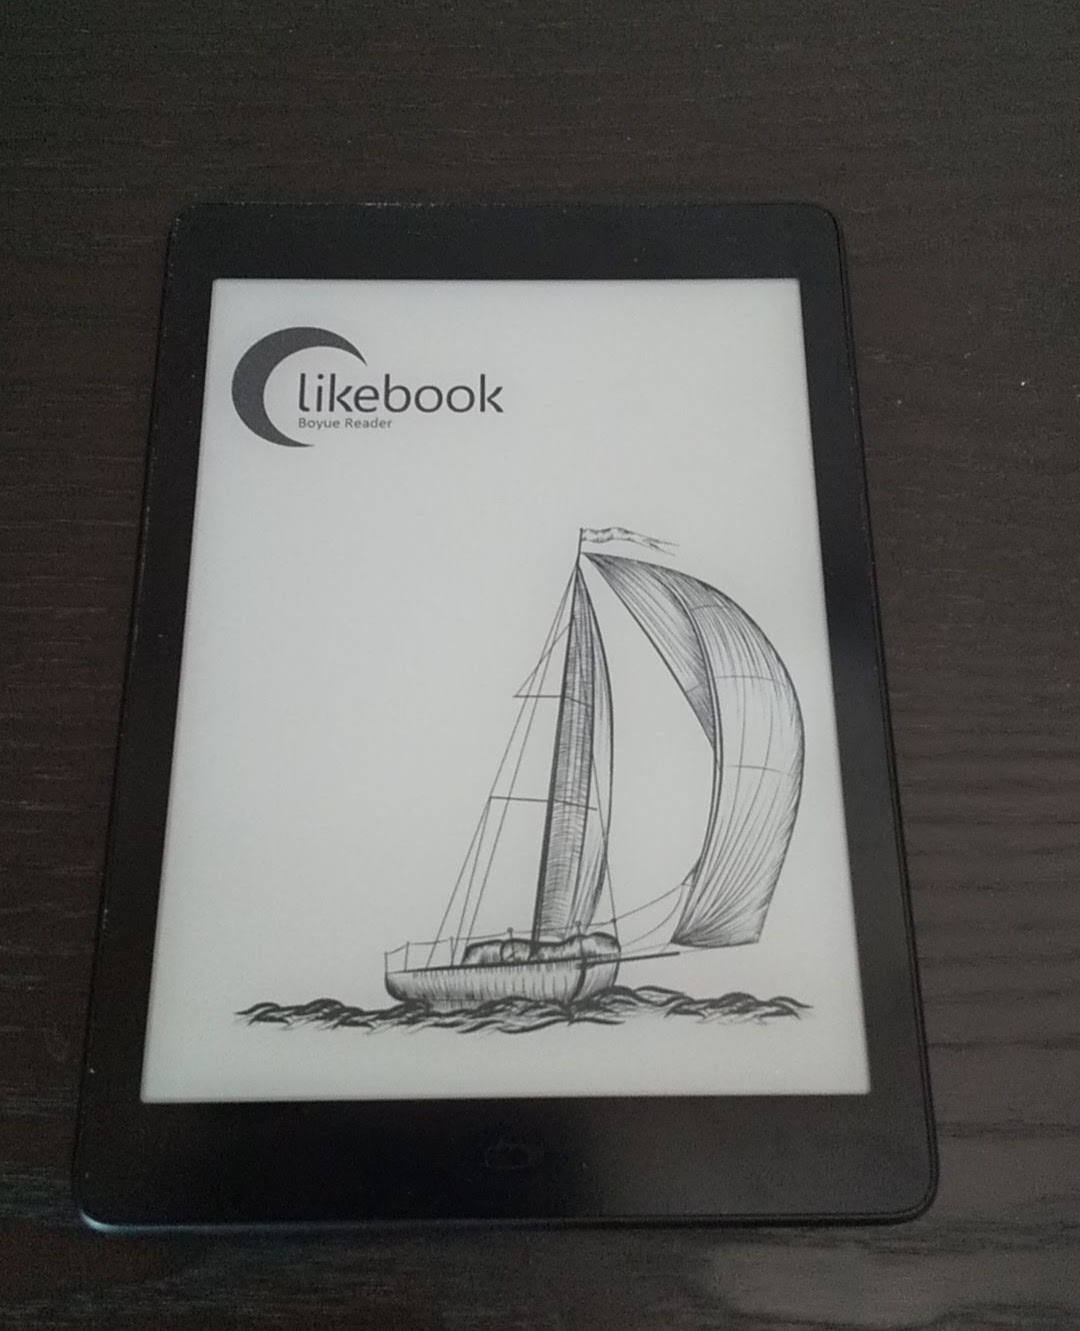 LikeBook Ares Note 電子書籍リーダー